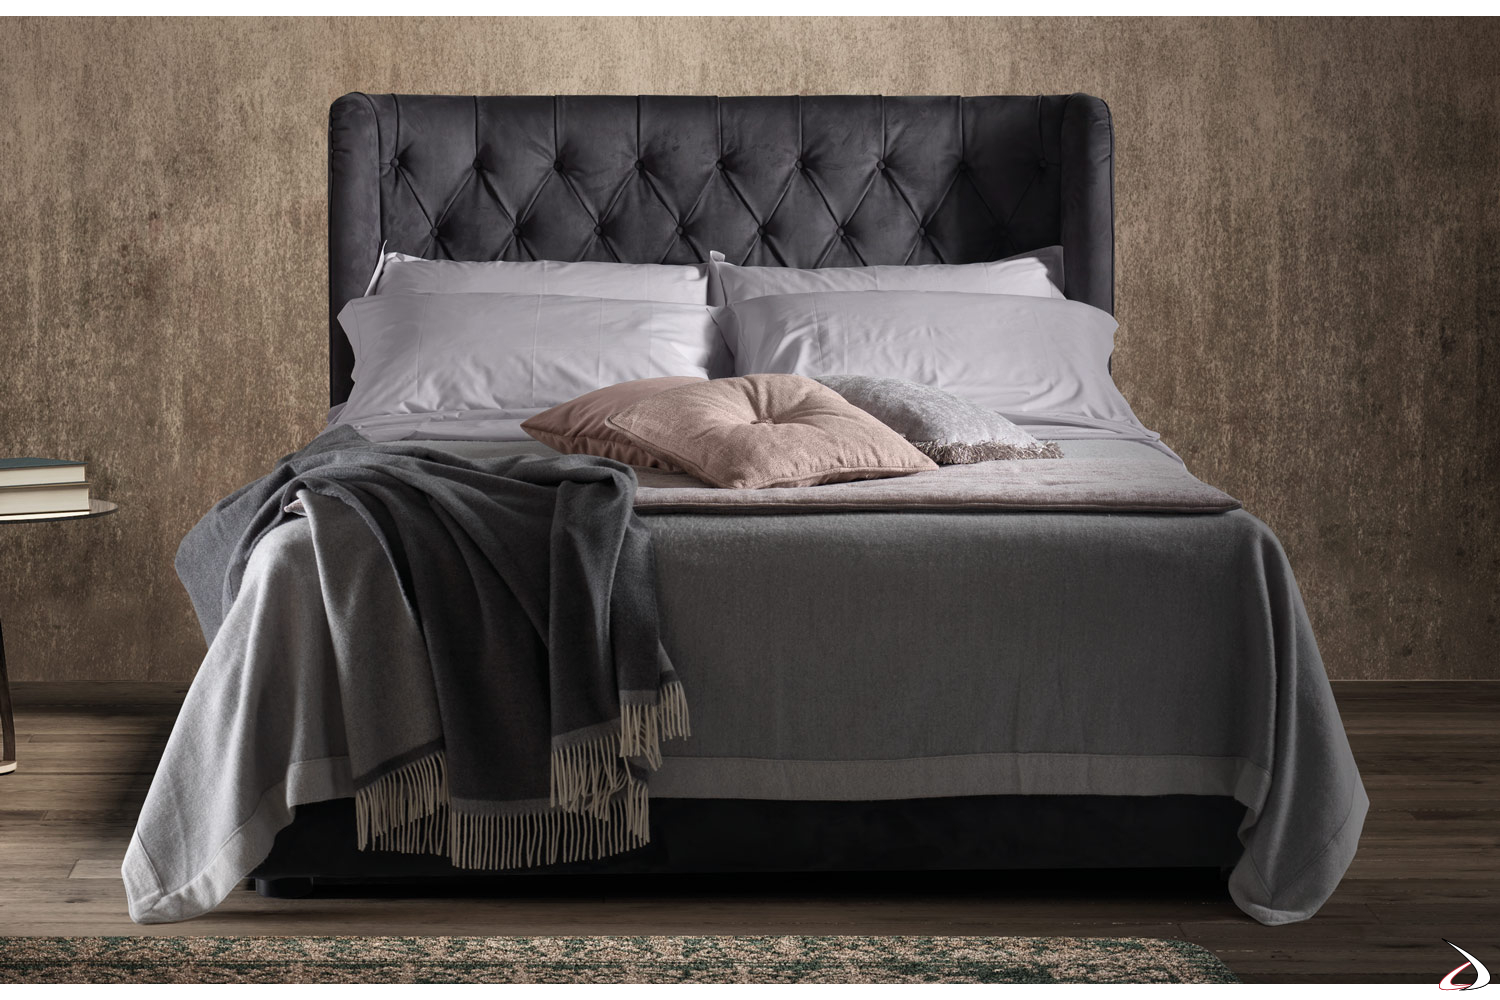 Letto Contenitore King Size.Gemmy Double Tufted Bed Toparredi Arredo Design Online